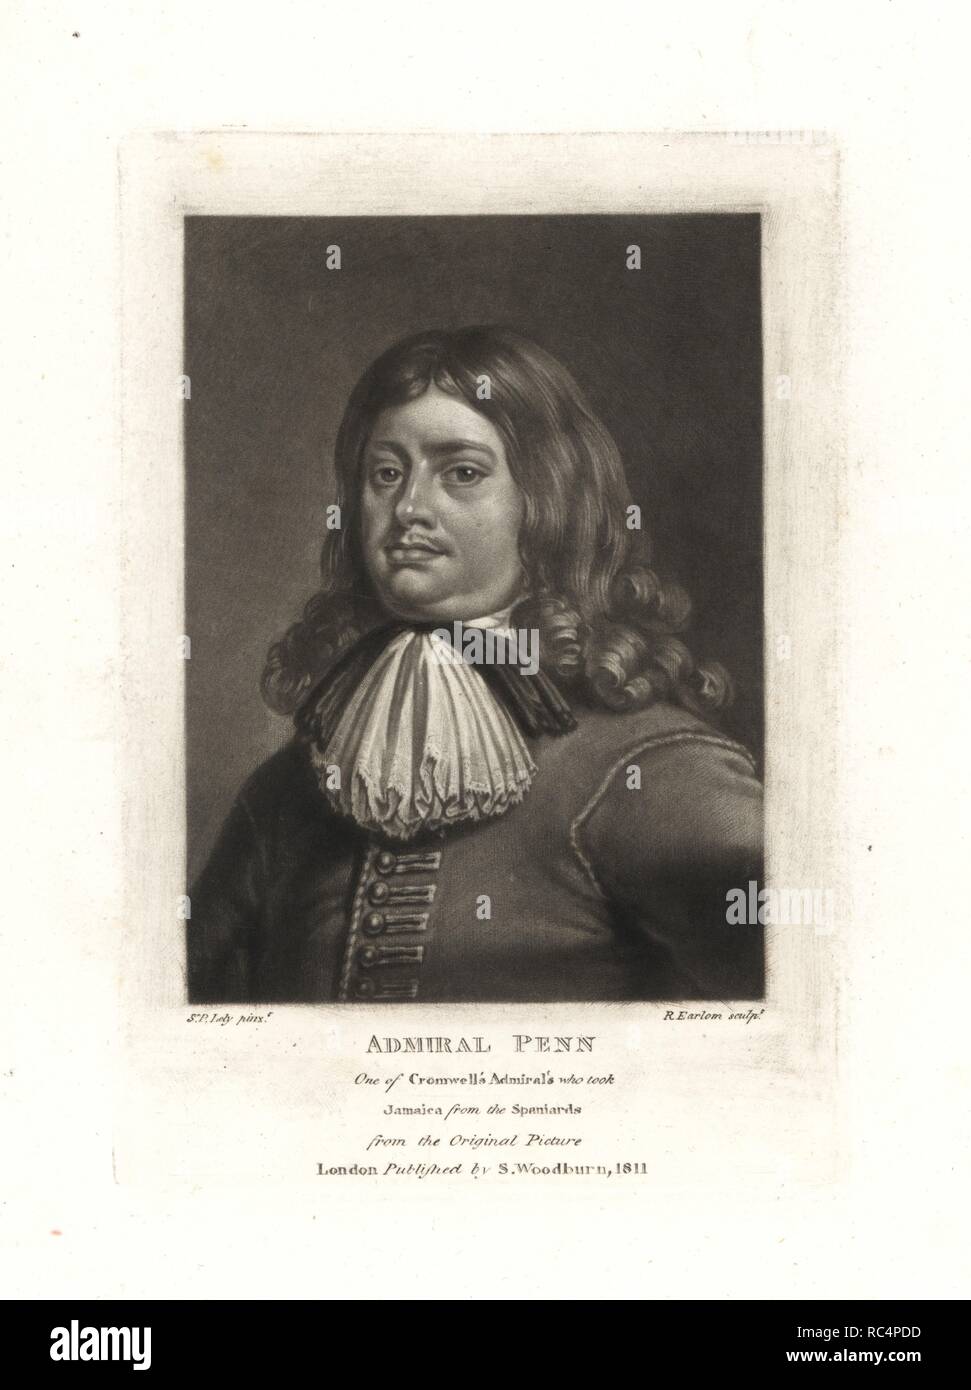 Sir William Penn, admiral for Oliver Cromwell's navy who took Jamaica from the Spanish, father of the founder of Pennsylvania, died 1670. Copperplate mezzotint by Richard Earlom after an original painting by Sir Peter Lely from Samuel Woodburn's Portraits of Characters Illustrious in British History, London, 1810. Stock Photo